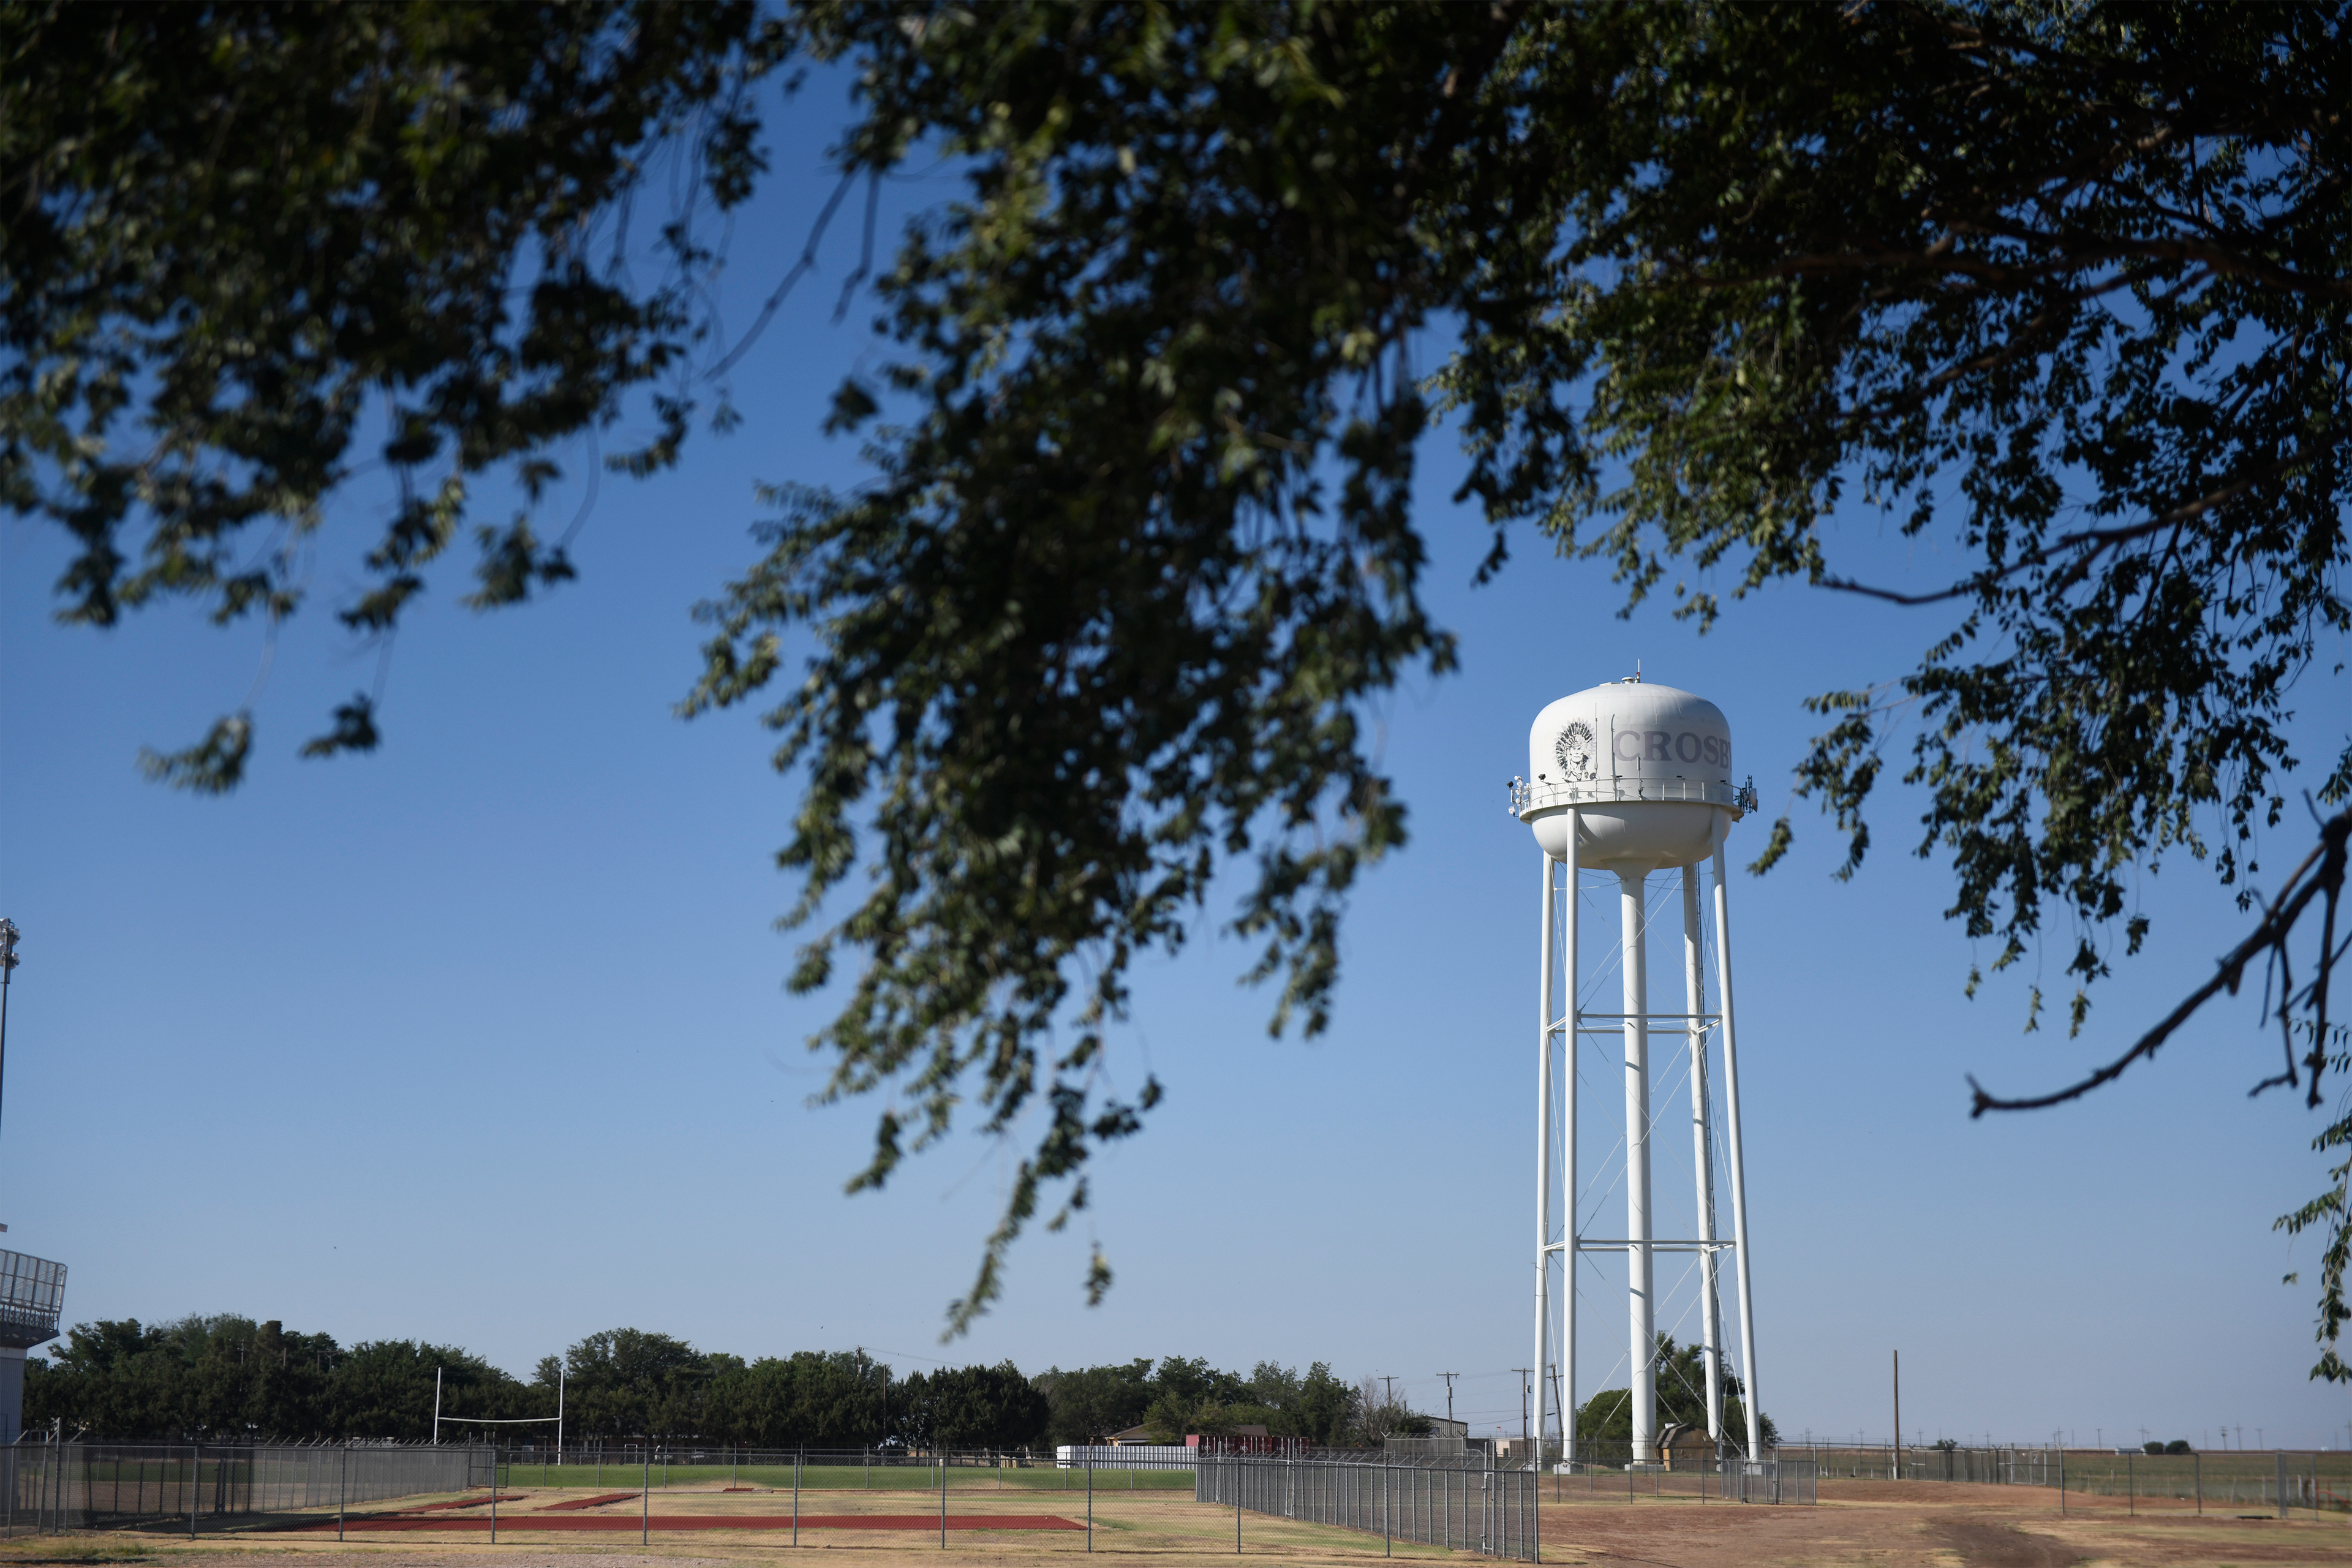 A photo shows Crosbyton's water tower in the distance framed by trees in the foreground.